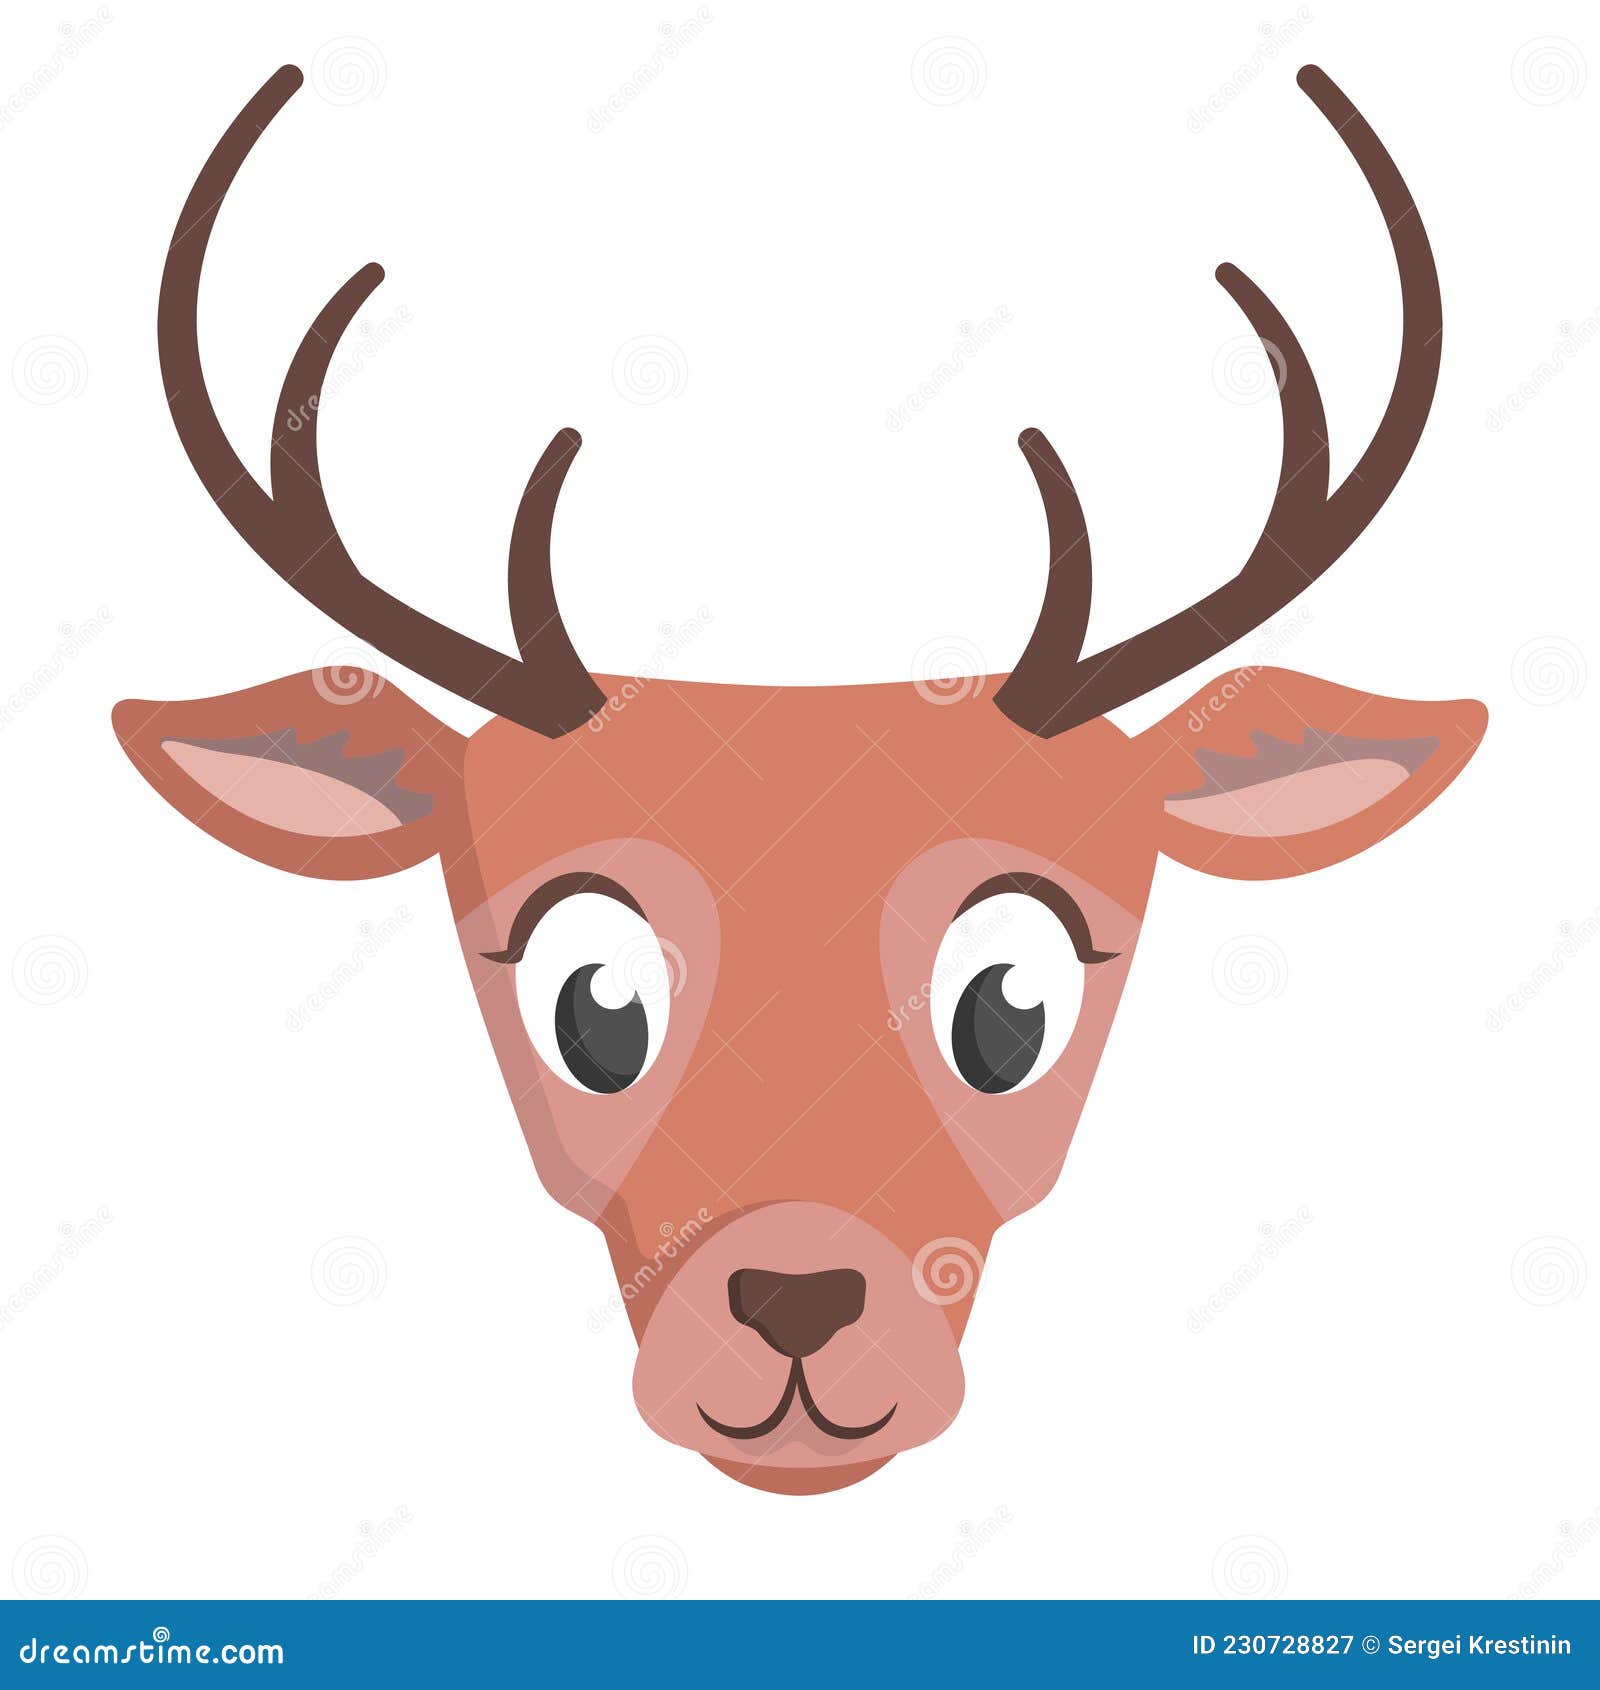 Deer face front view. stock vector. Illustration of forest - 230728827